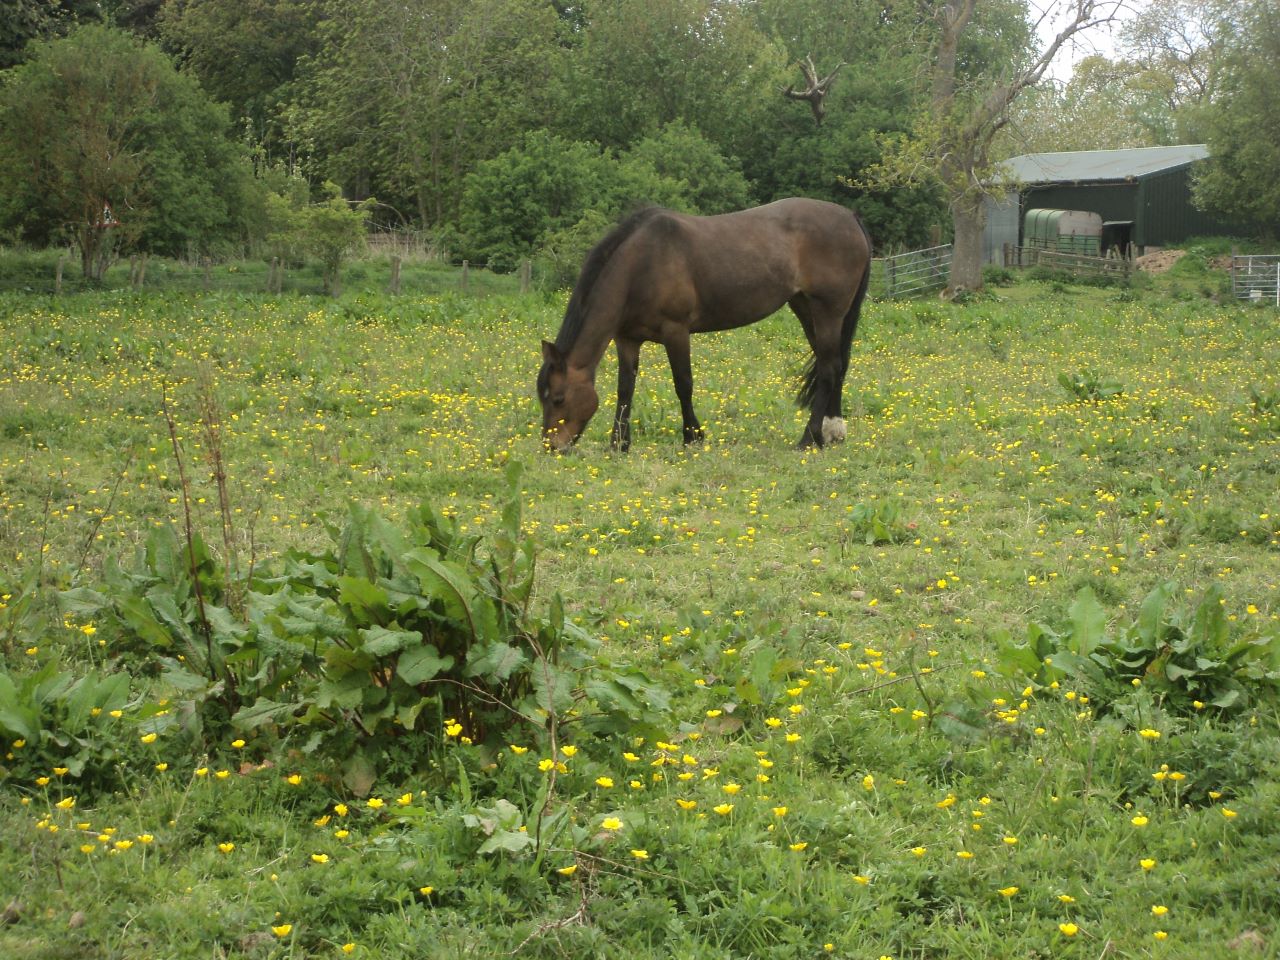 Get rid of weeds in horse paddocks for good.